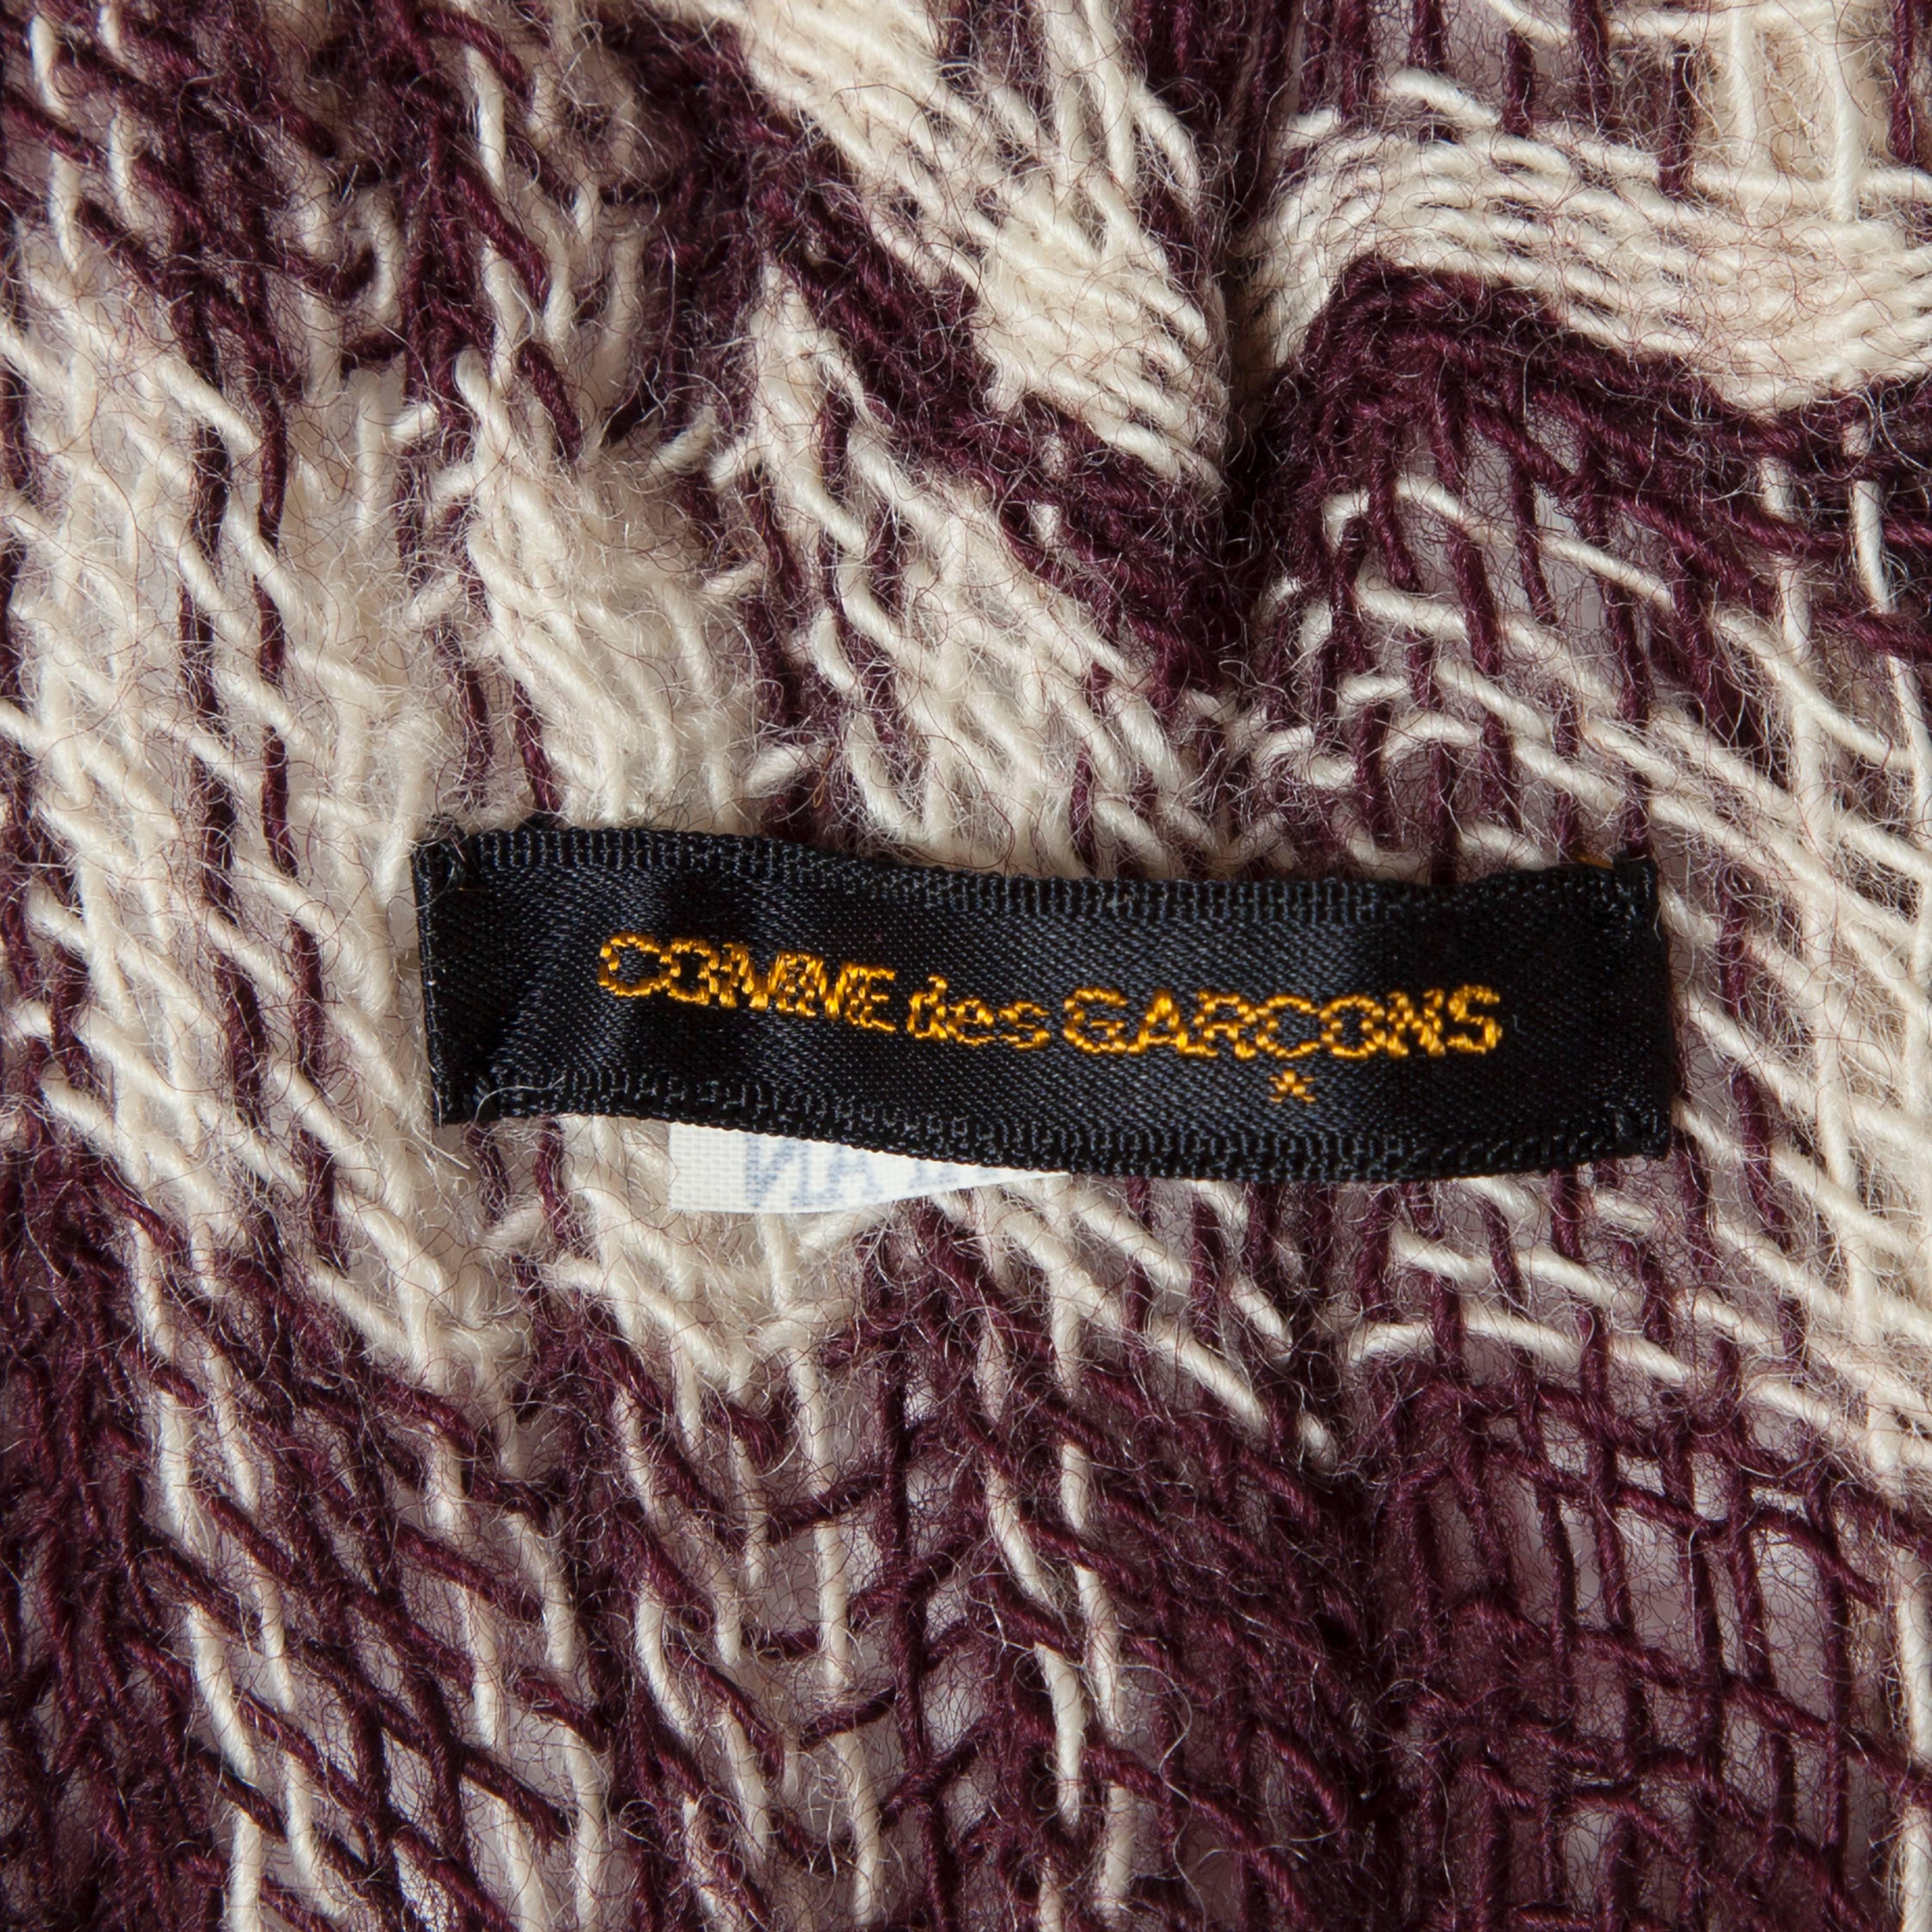 Comme des Garcons knit woven over sized scarf from 1983.
Plaid like pattern with bordeaux and cream white wool yarn carefully woven material with such calculated detail. Great archive piece.
The same scarf was used in book 1986 editorial 